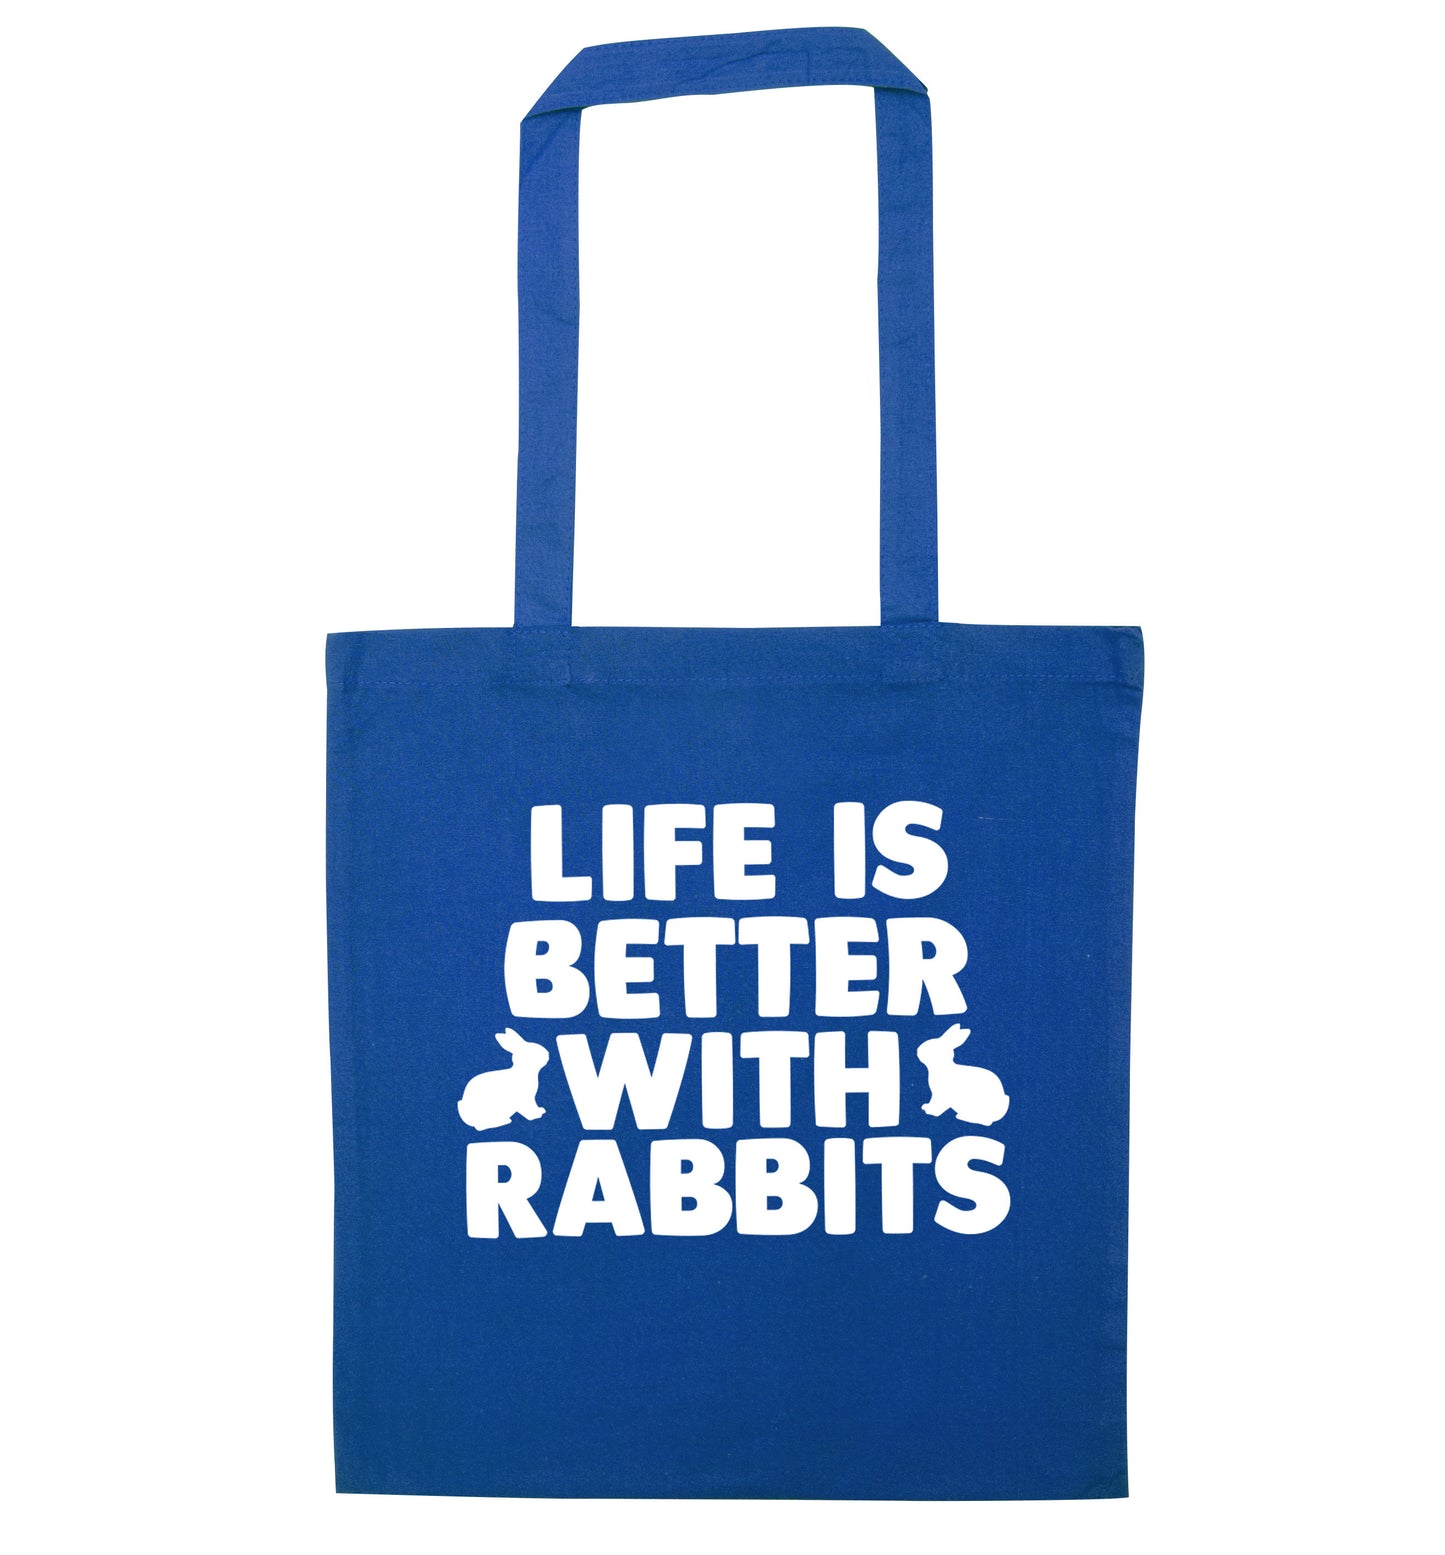 Life is better with rabbits blue tote bag